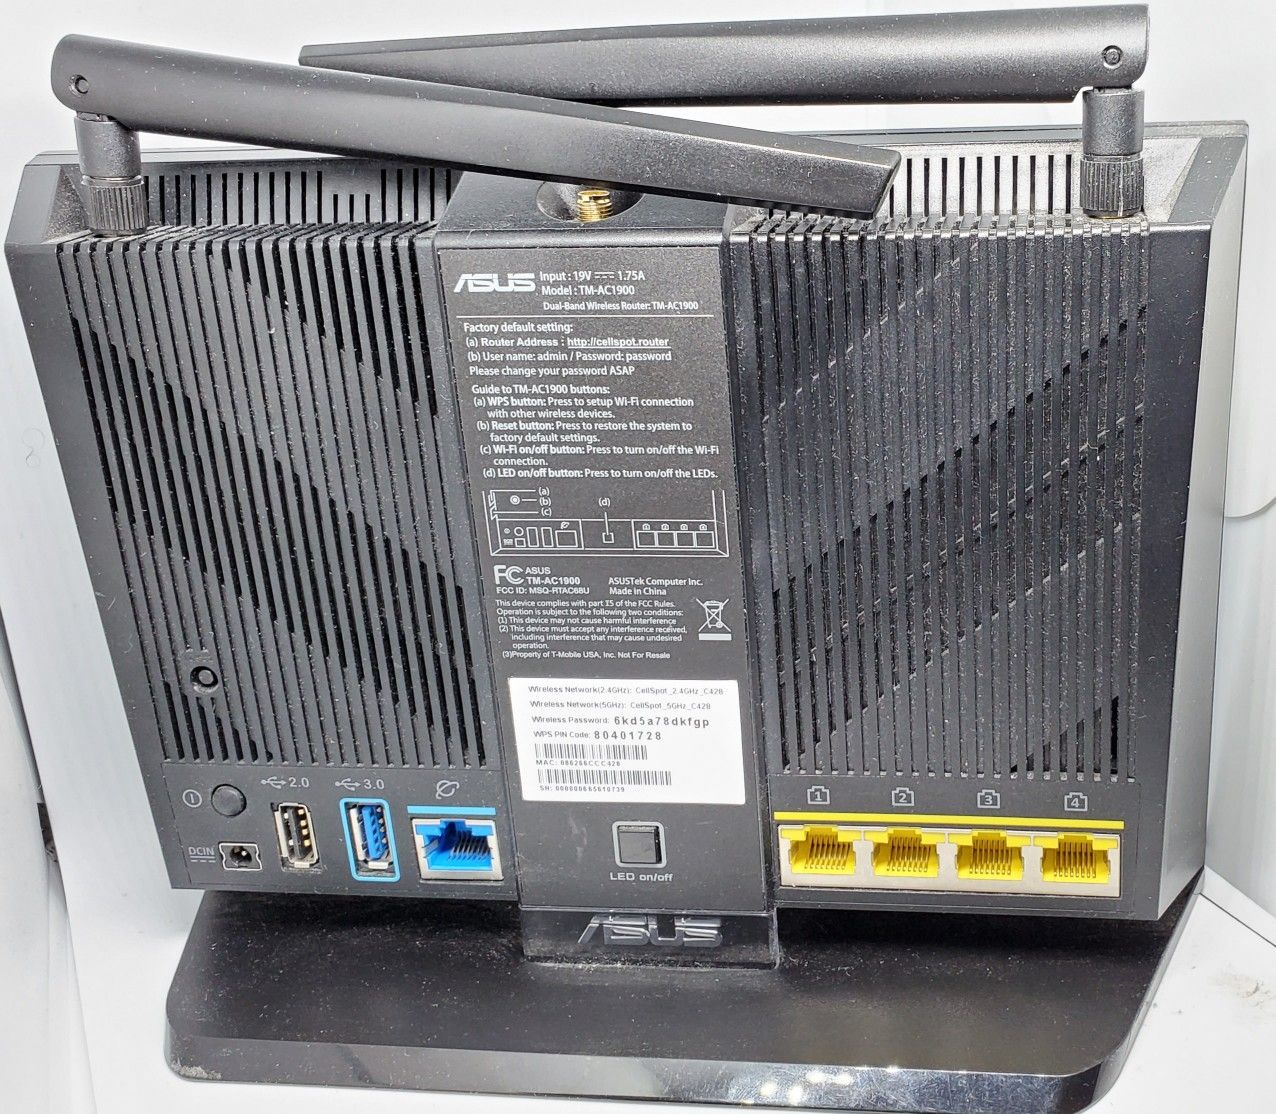 Asus router with two antennae